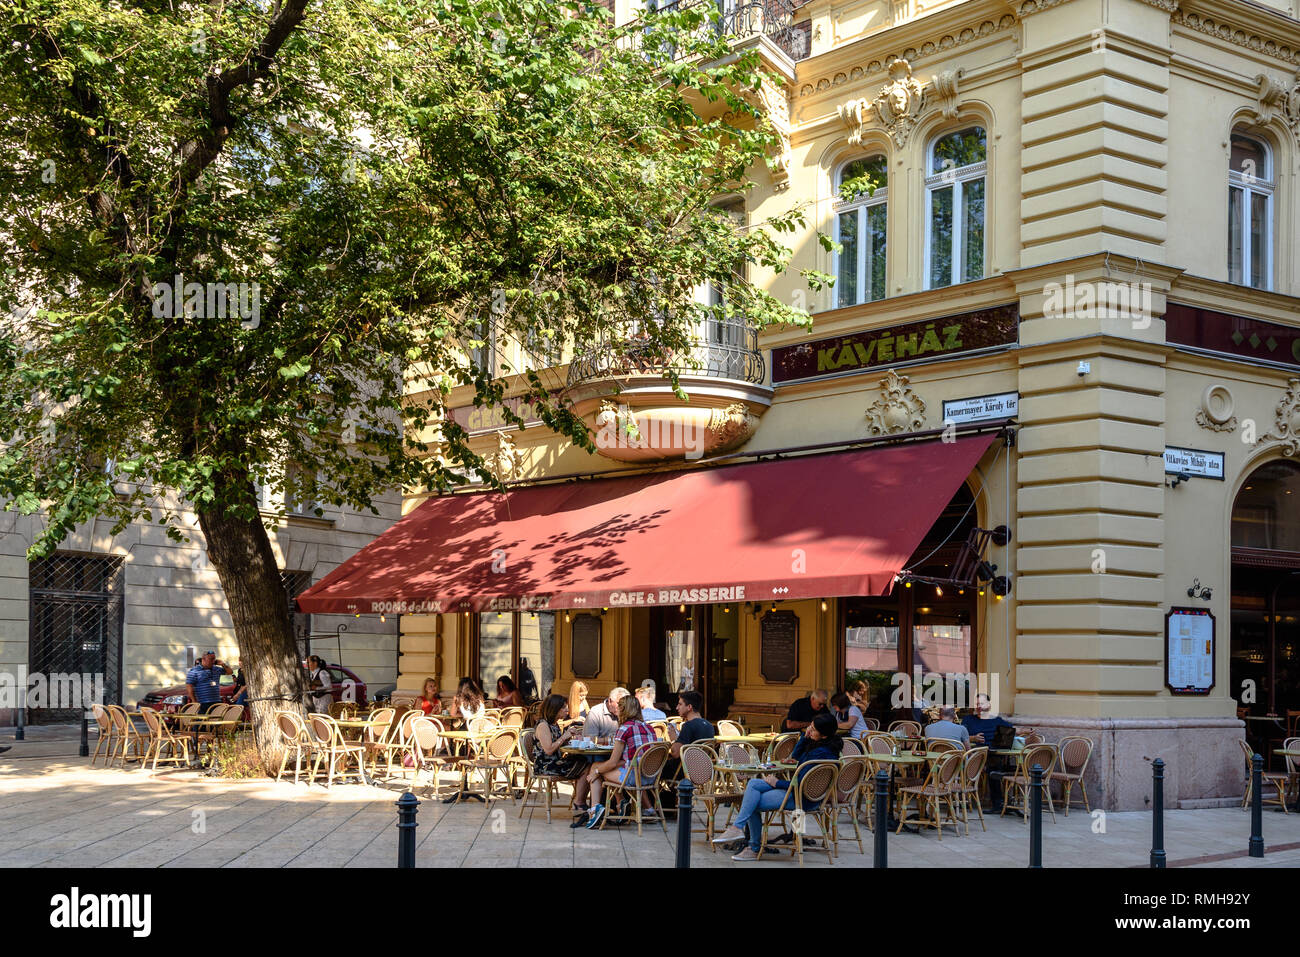 People enjoying breakfast on a cafe terrace in central Budapest, Hungary Stock Photo